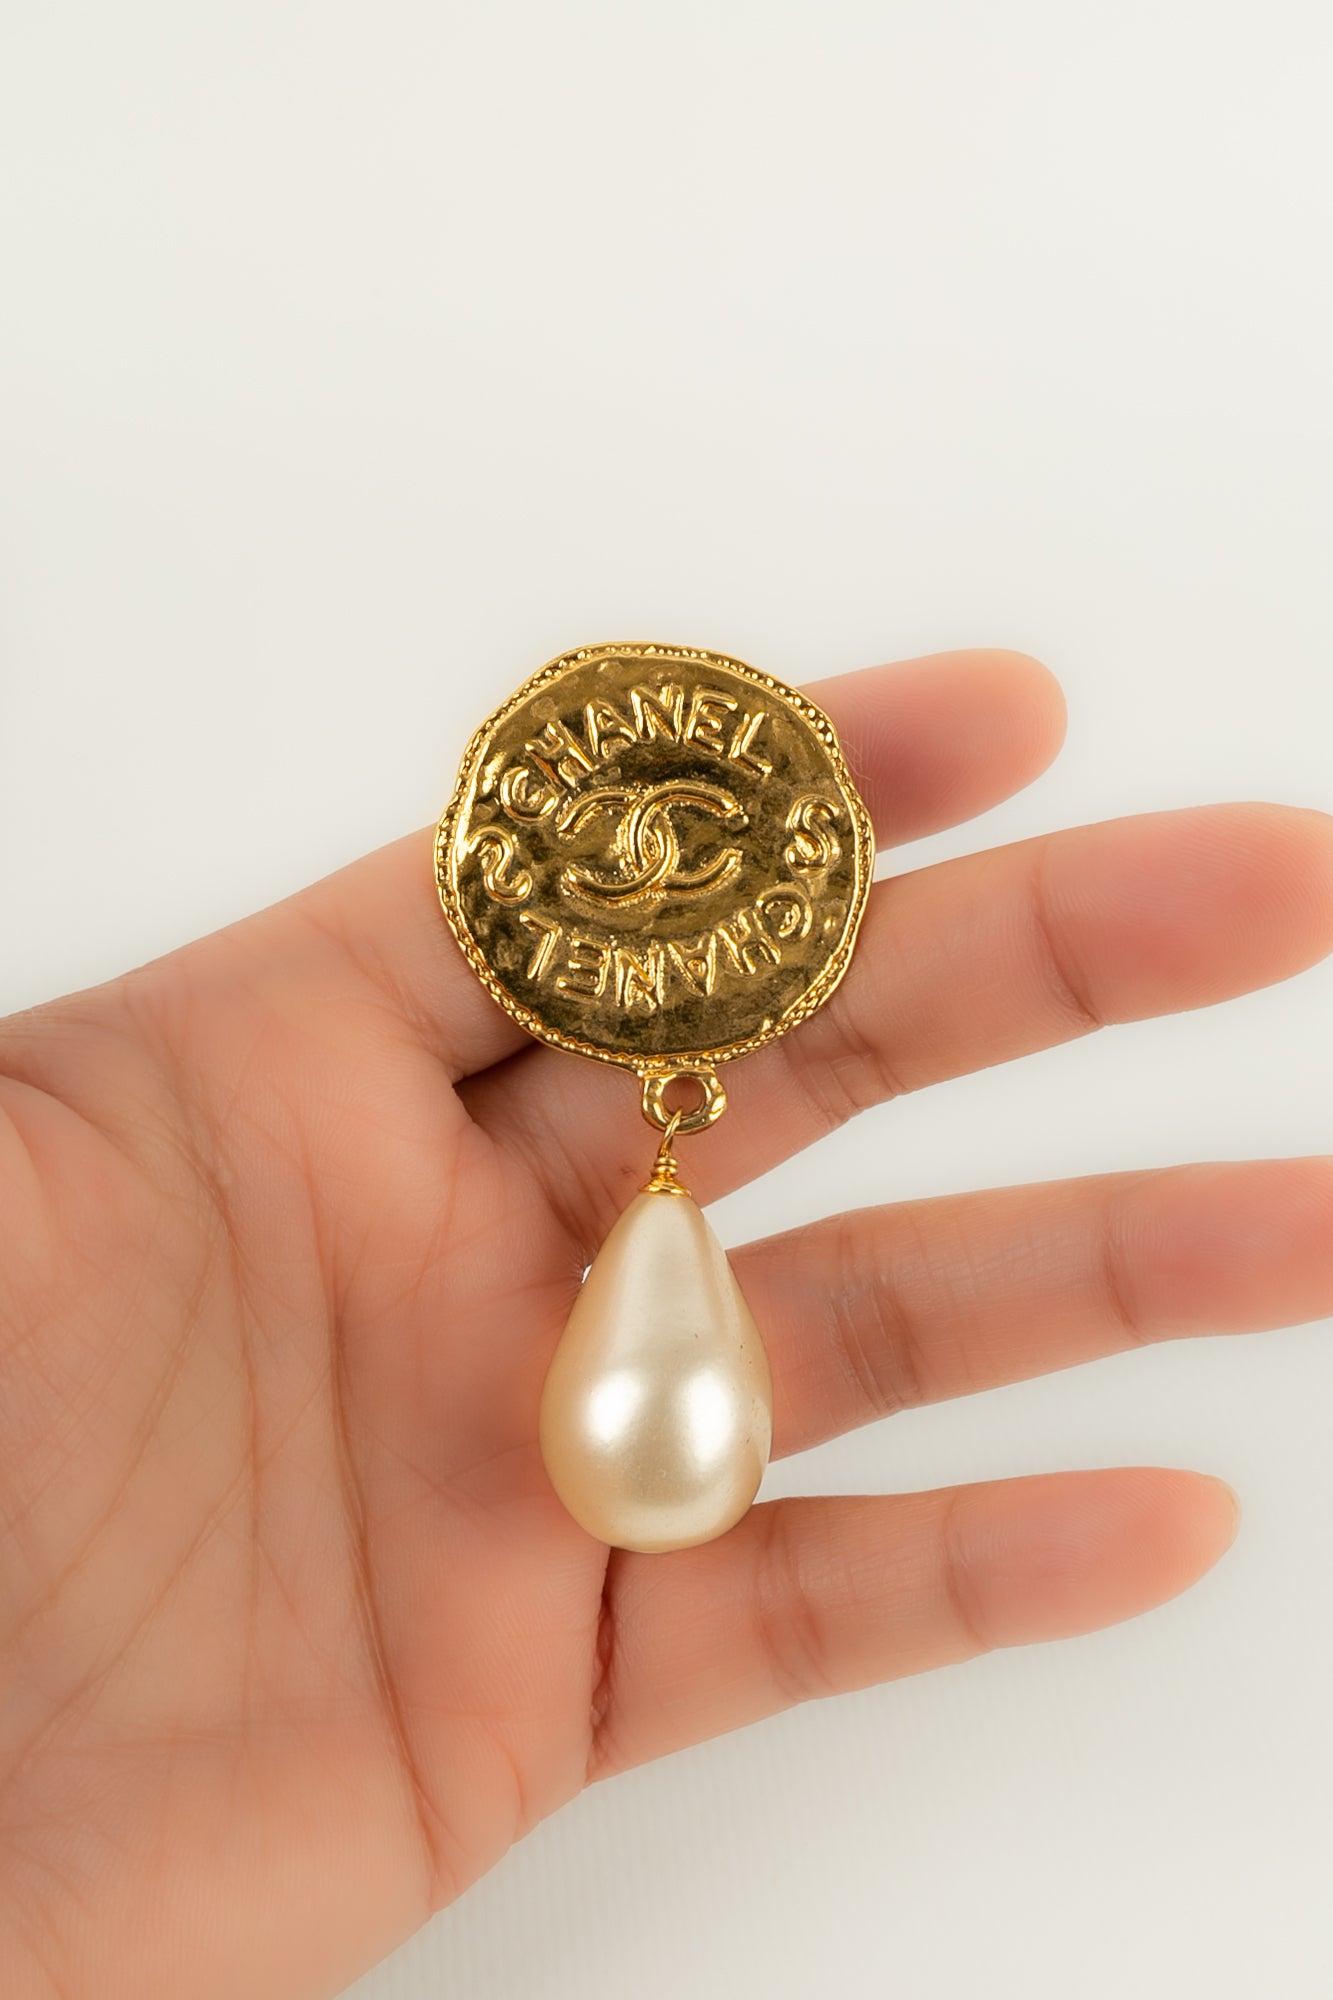 Chanel - (Made in France) Brooch in gold-plated metal and costume pearly beads. Fall/Winter 1994 Collection.

Additional information:
Condition: Very good condition
Dimensions: Height: 7 cm
Period: 20th Century

Seller Reference: BRB29
